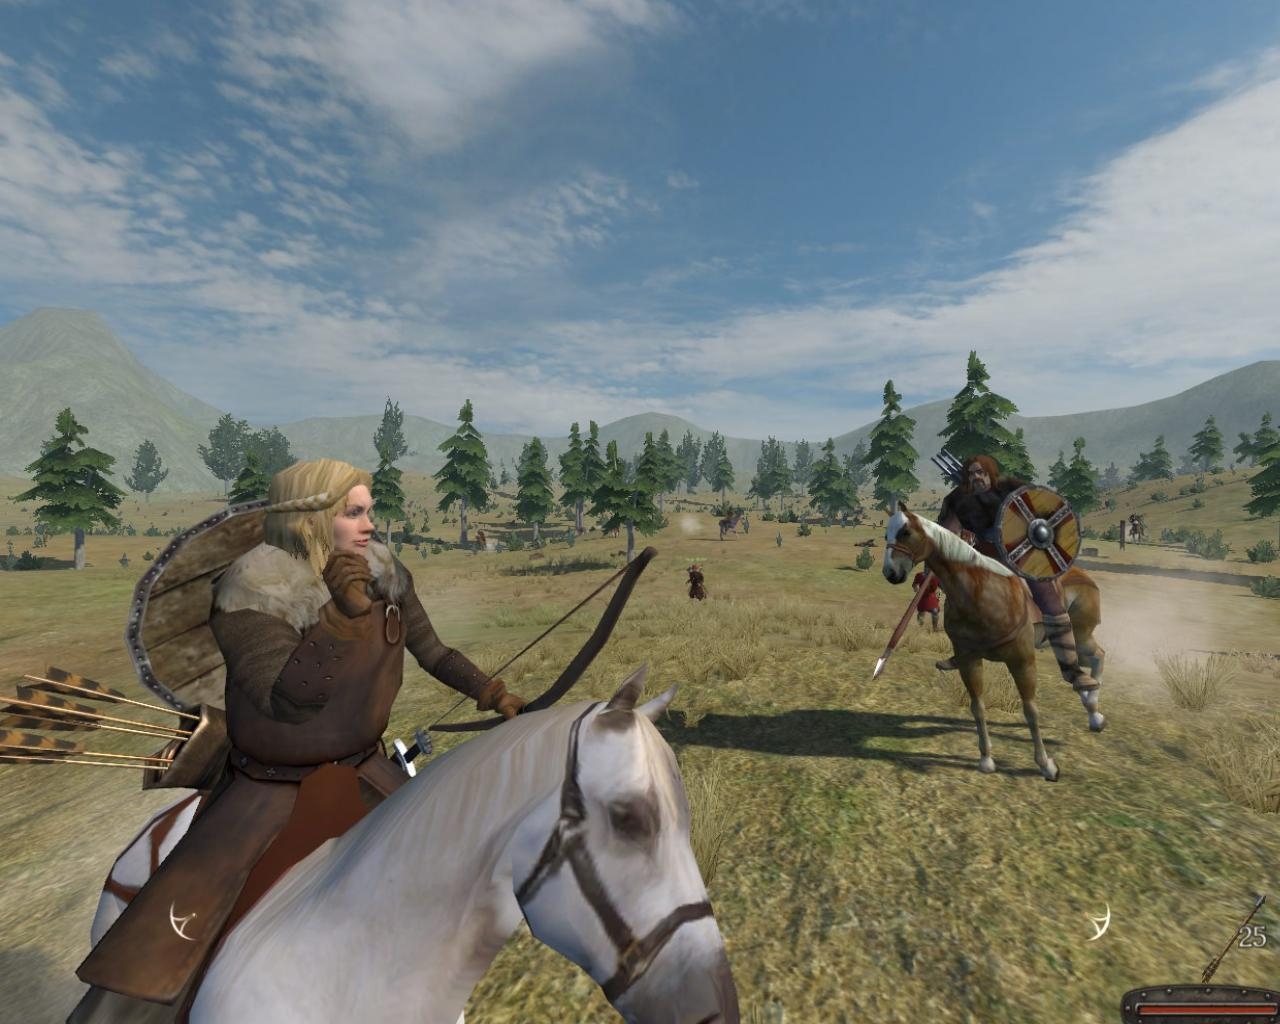 Mount and blade game. Mount & Blade 2008 г.. Mount & Blade (2008) игра. Игра Mount & Blade 3. Monte Blade 1.